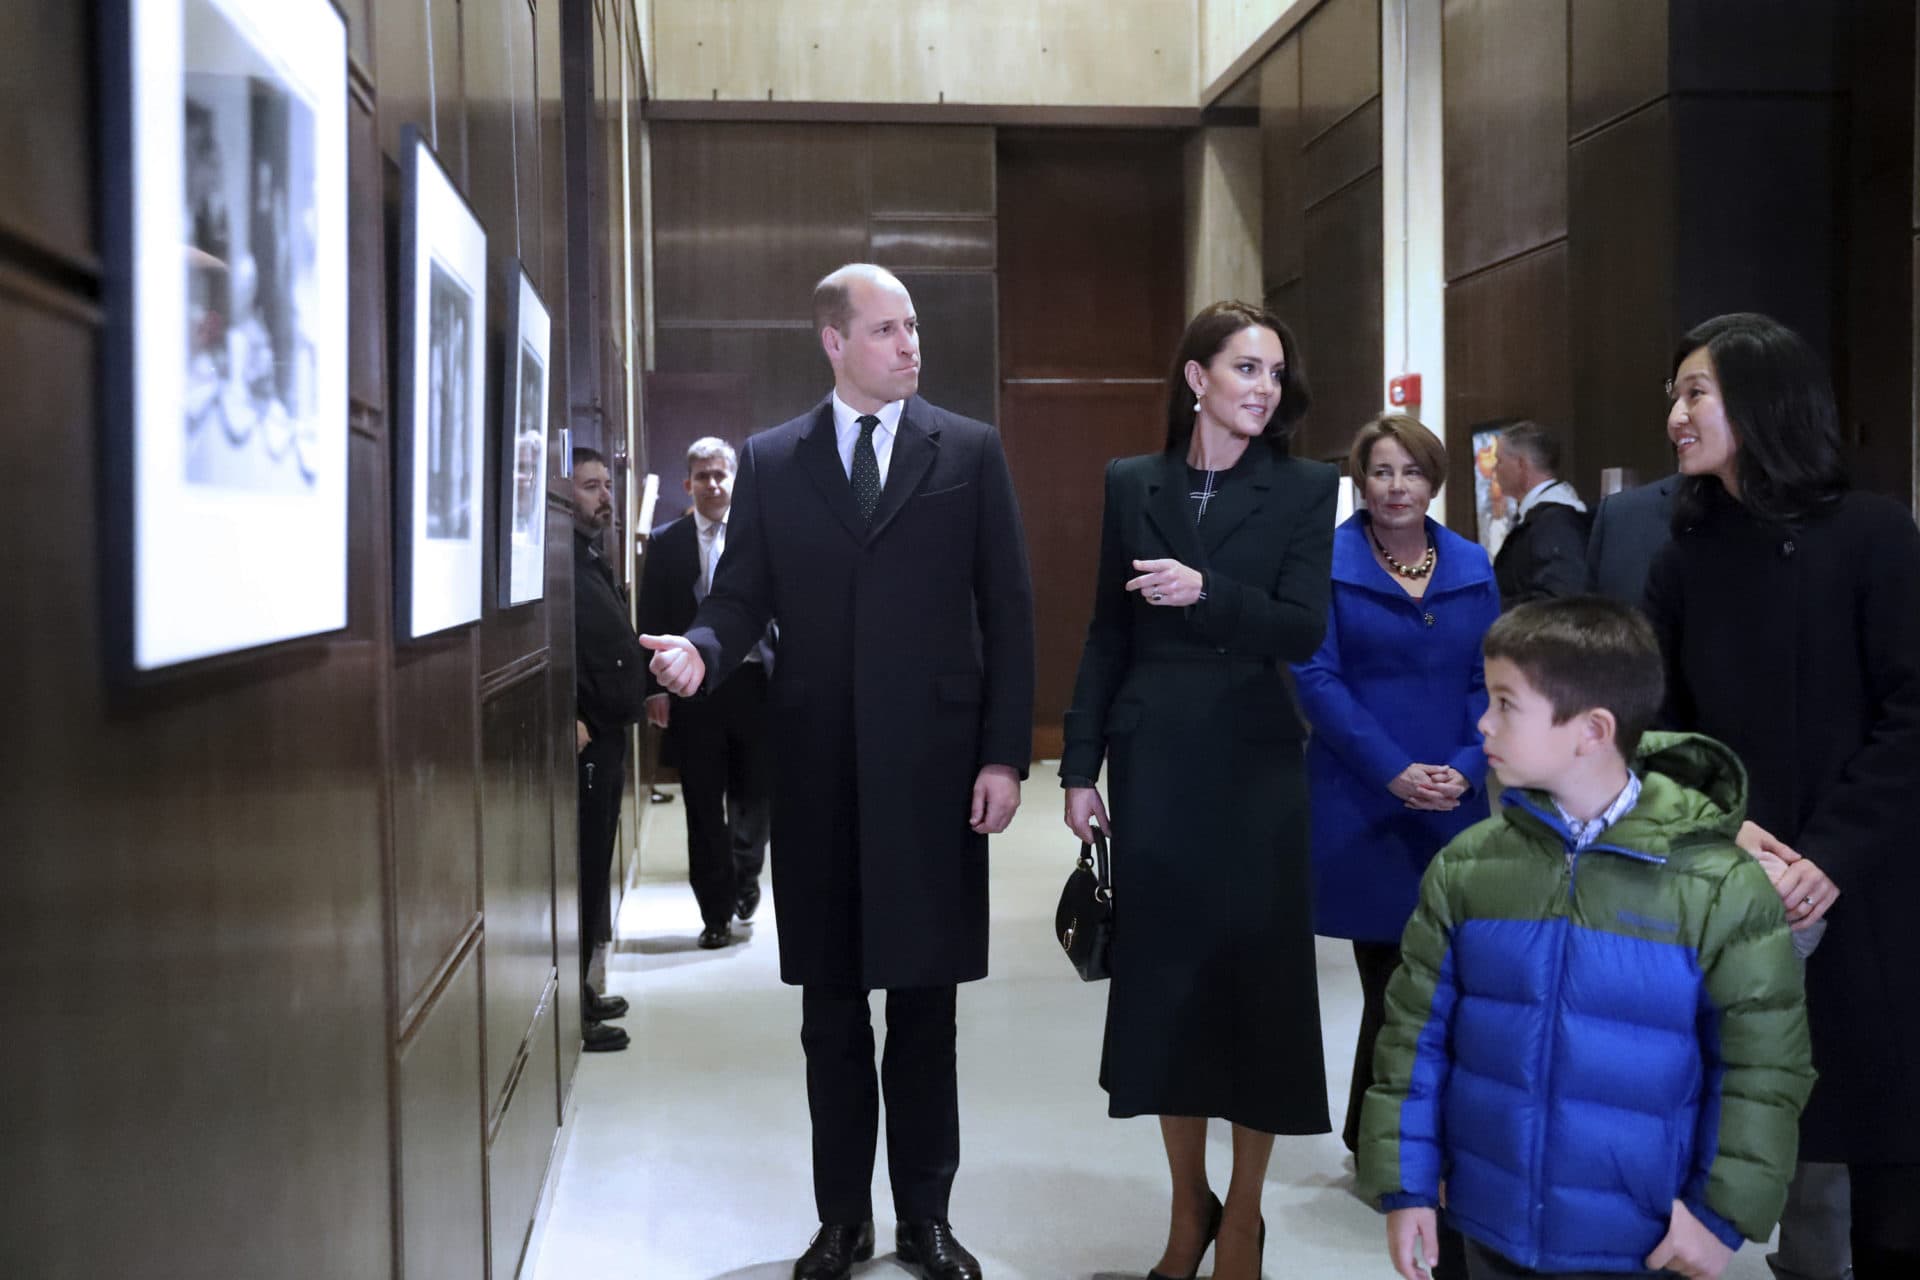 Boston Mayor Michelle Wu, right, and her family show photographs of Queen Elizabeth II's visit in 1976, during the visit of Britain's Prince William and Kate to Boston City Hall on Wednesday, Nov. 30, 2022, in Boston. (Nancy Lane/The Boston Herald via AP)